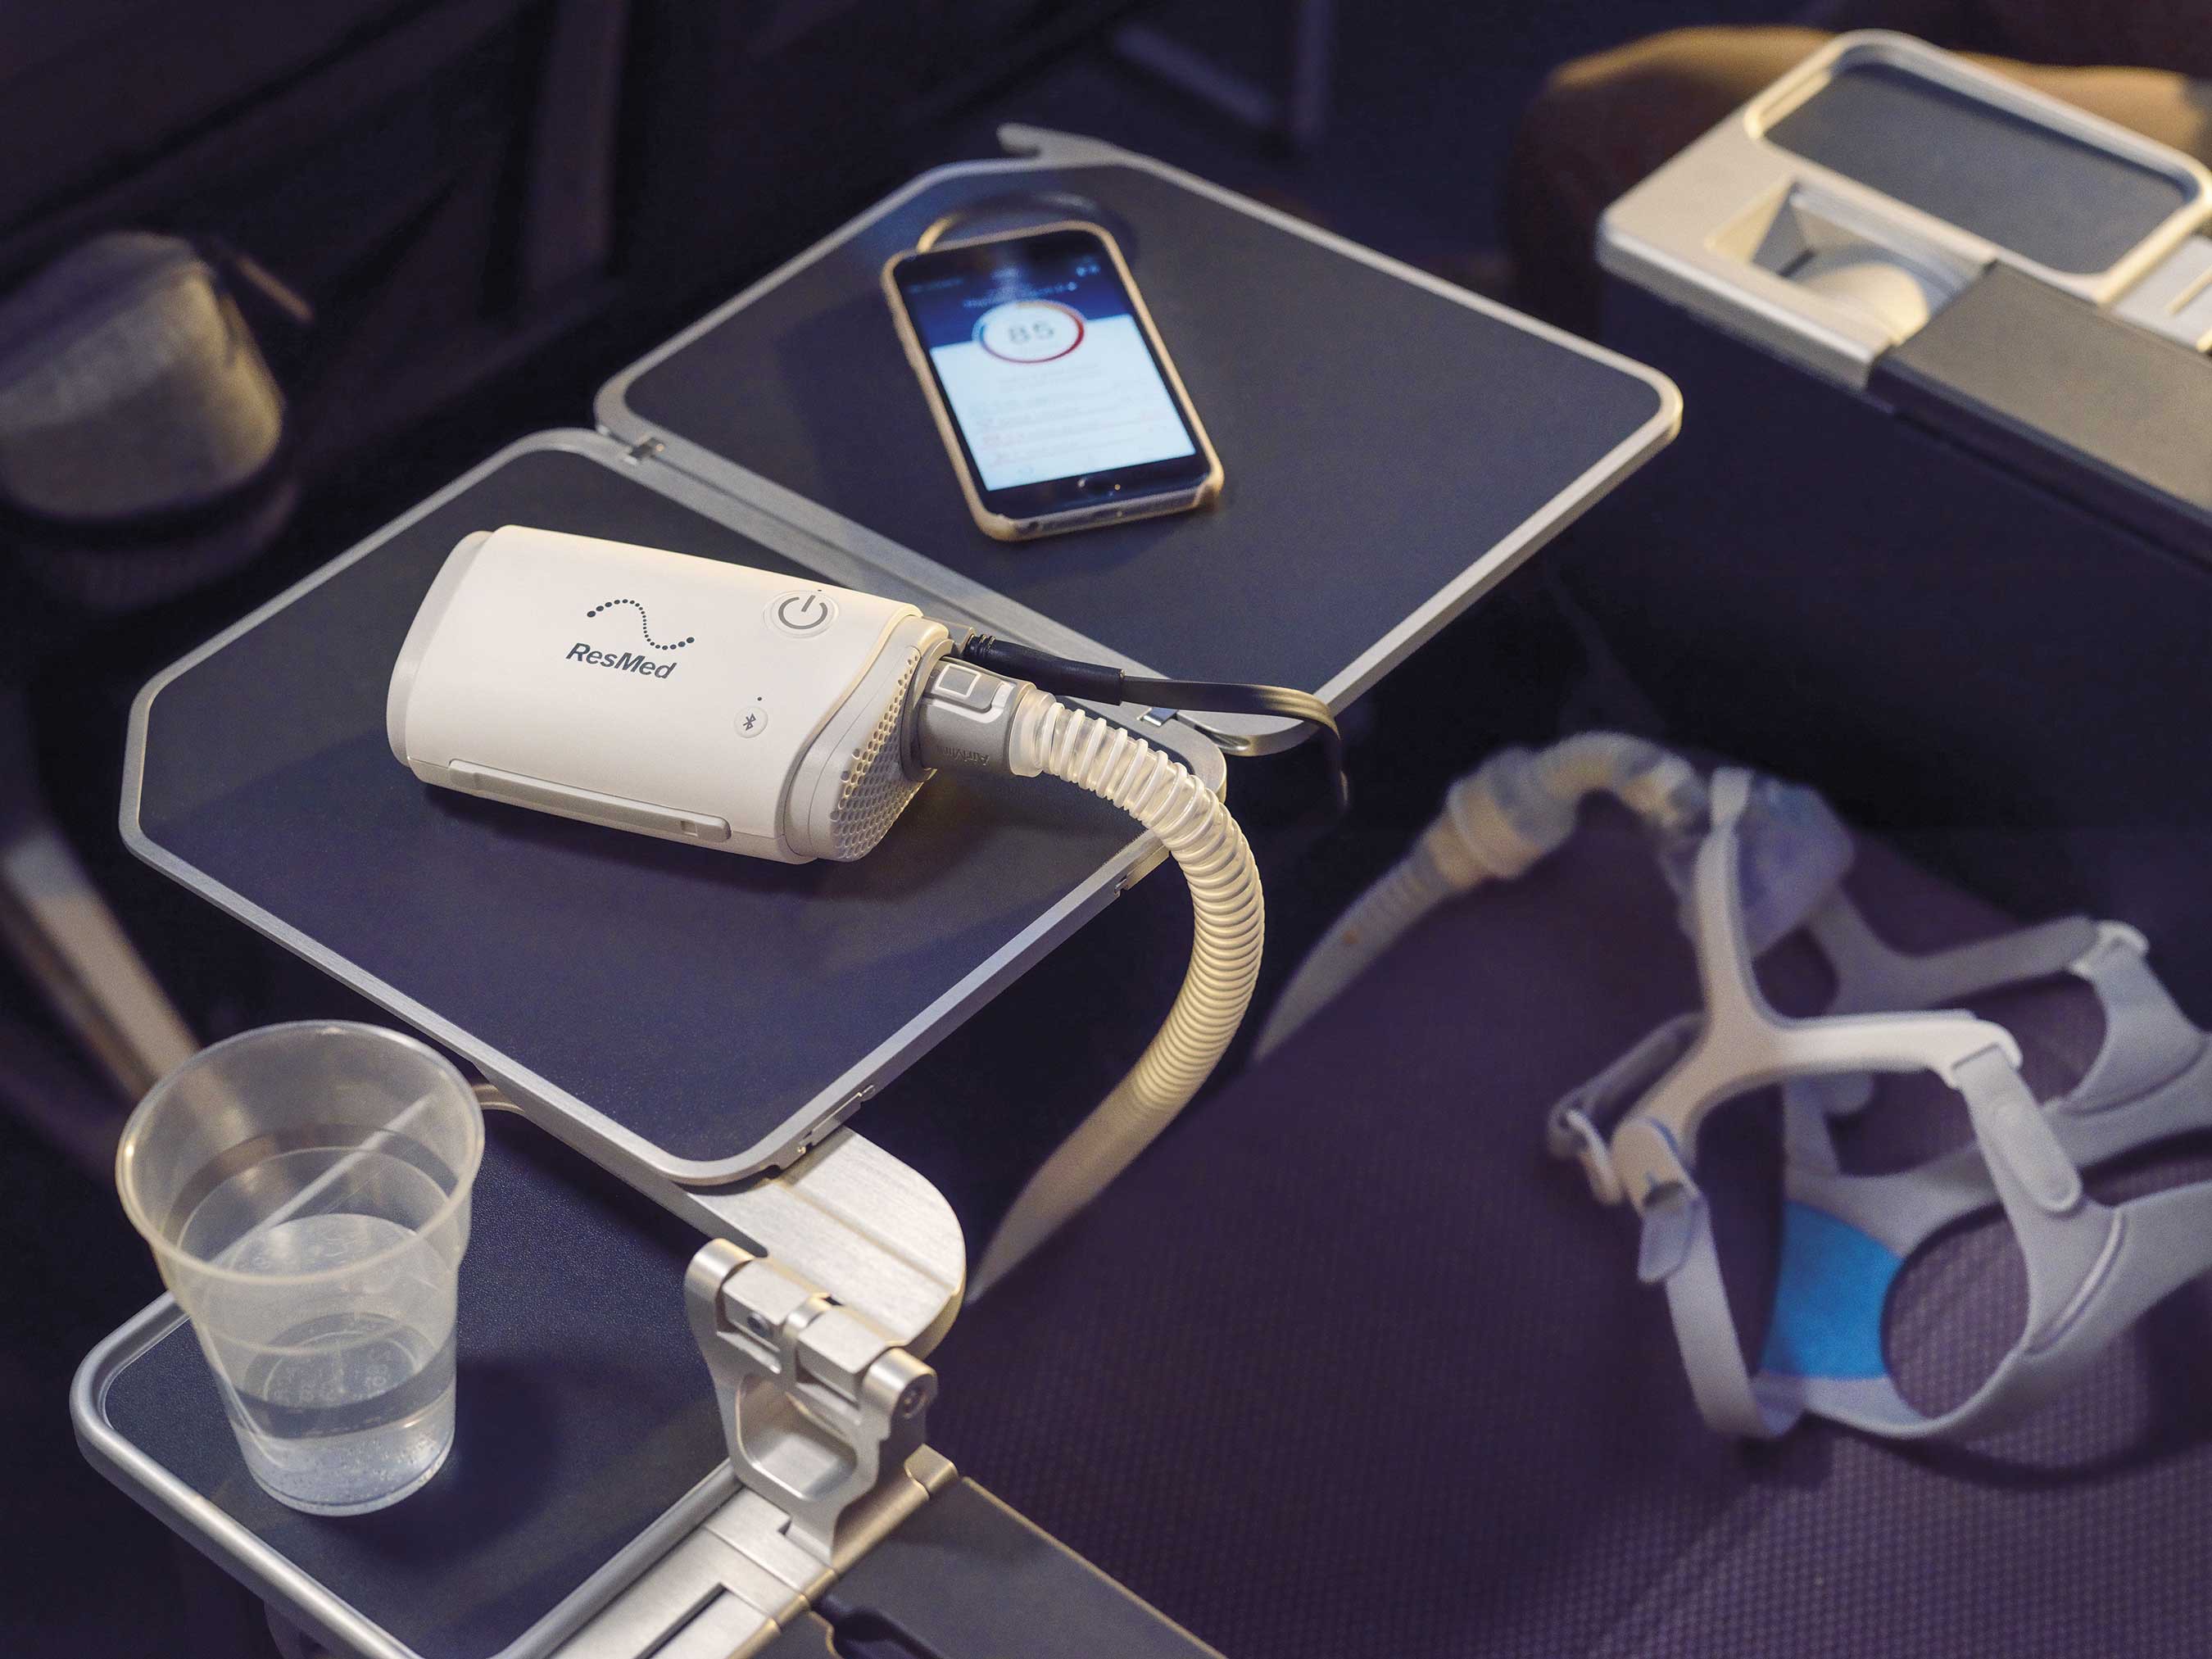 travel cpap machines resmed